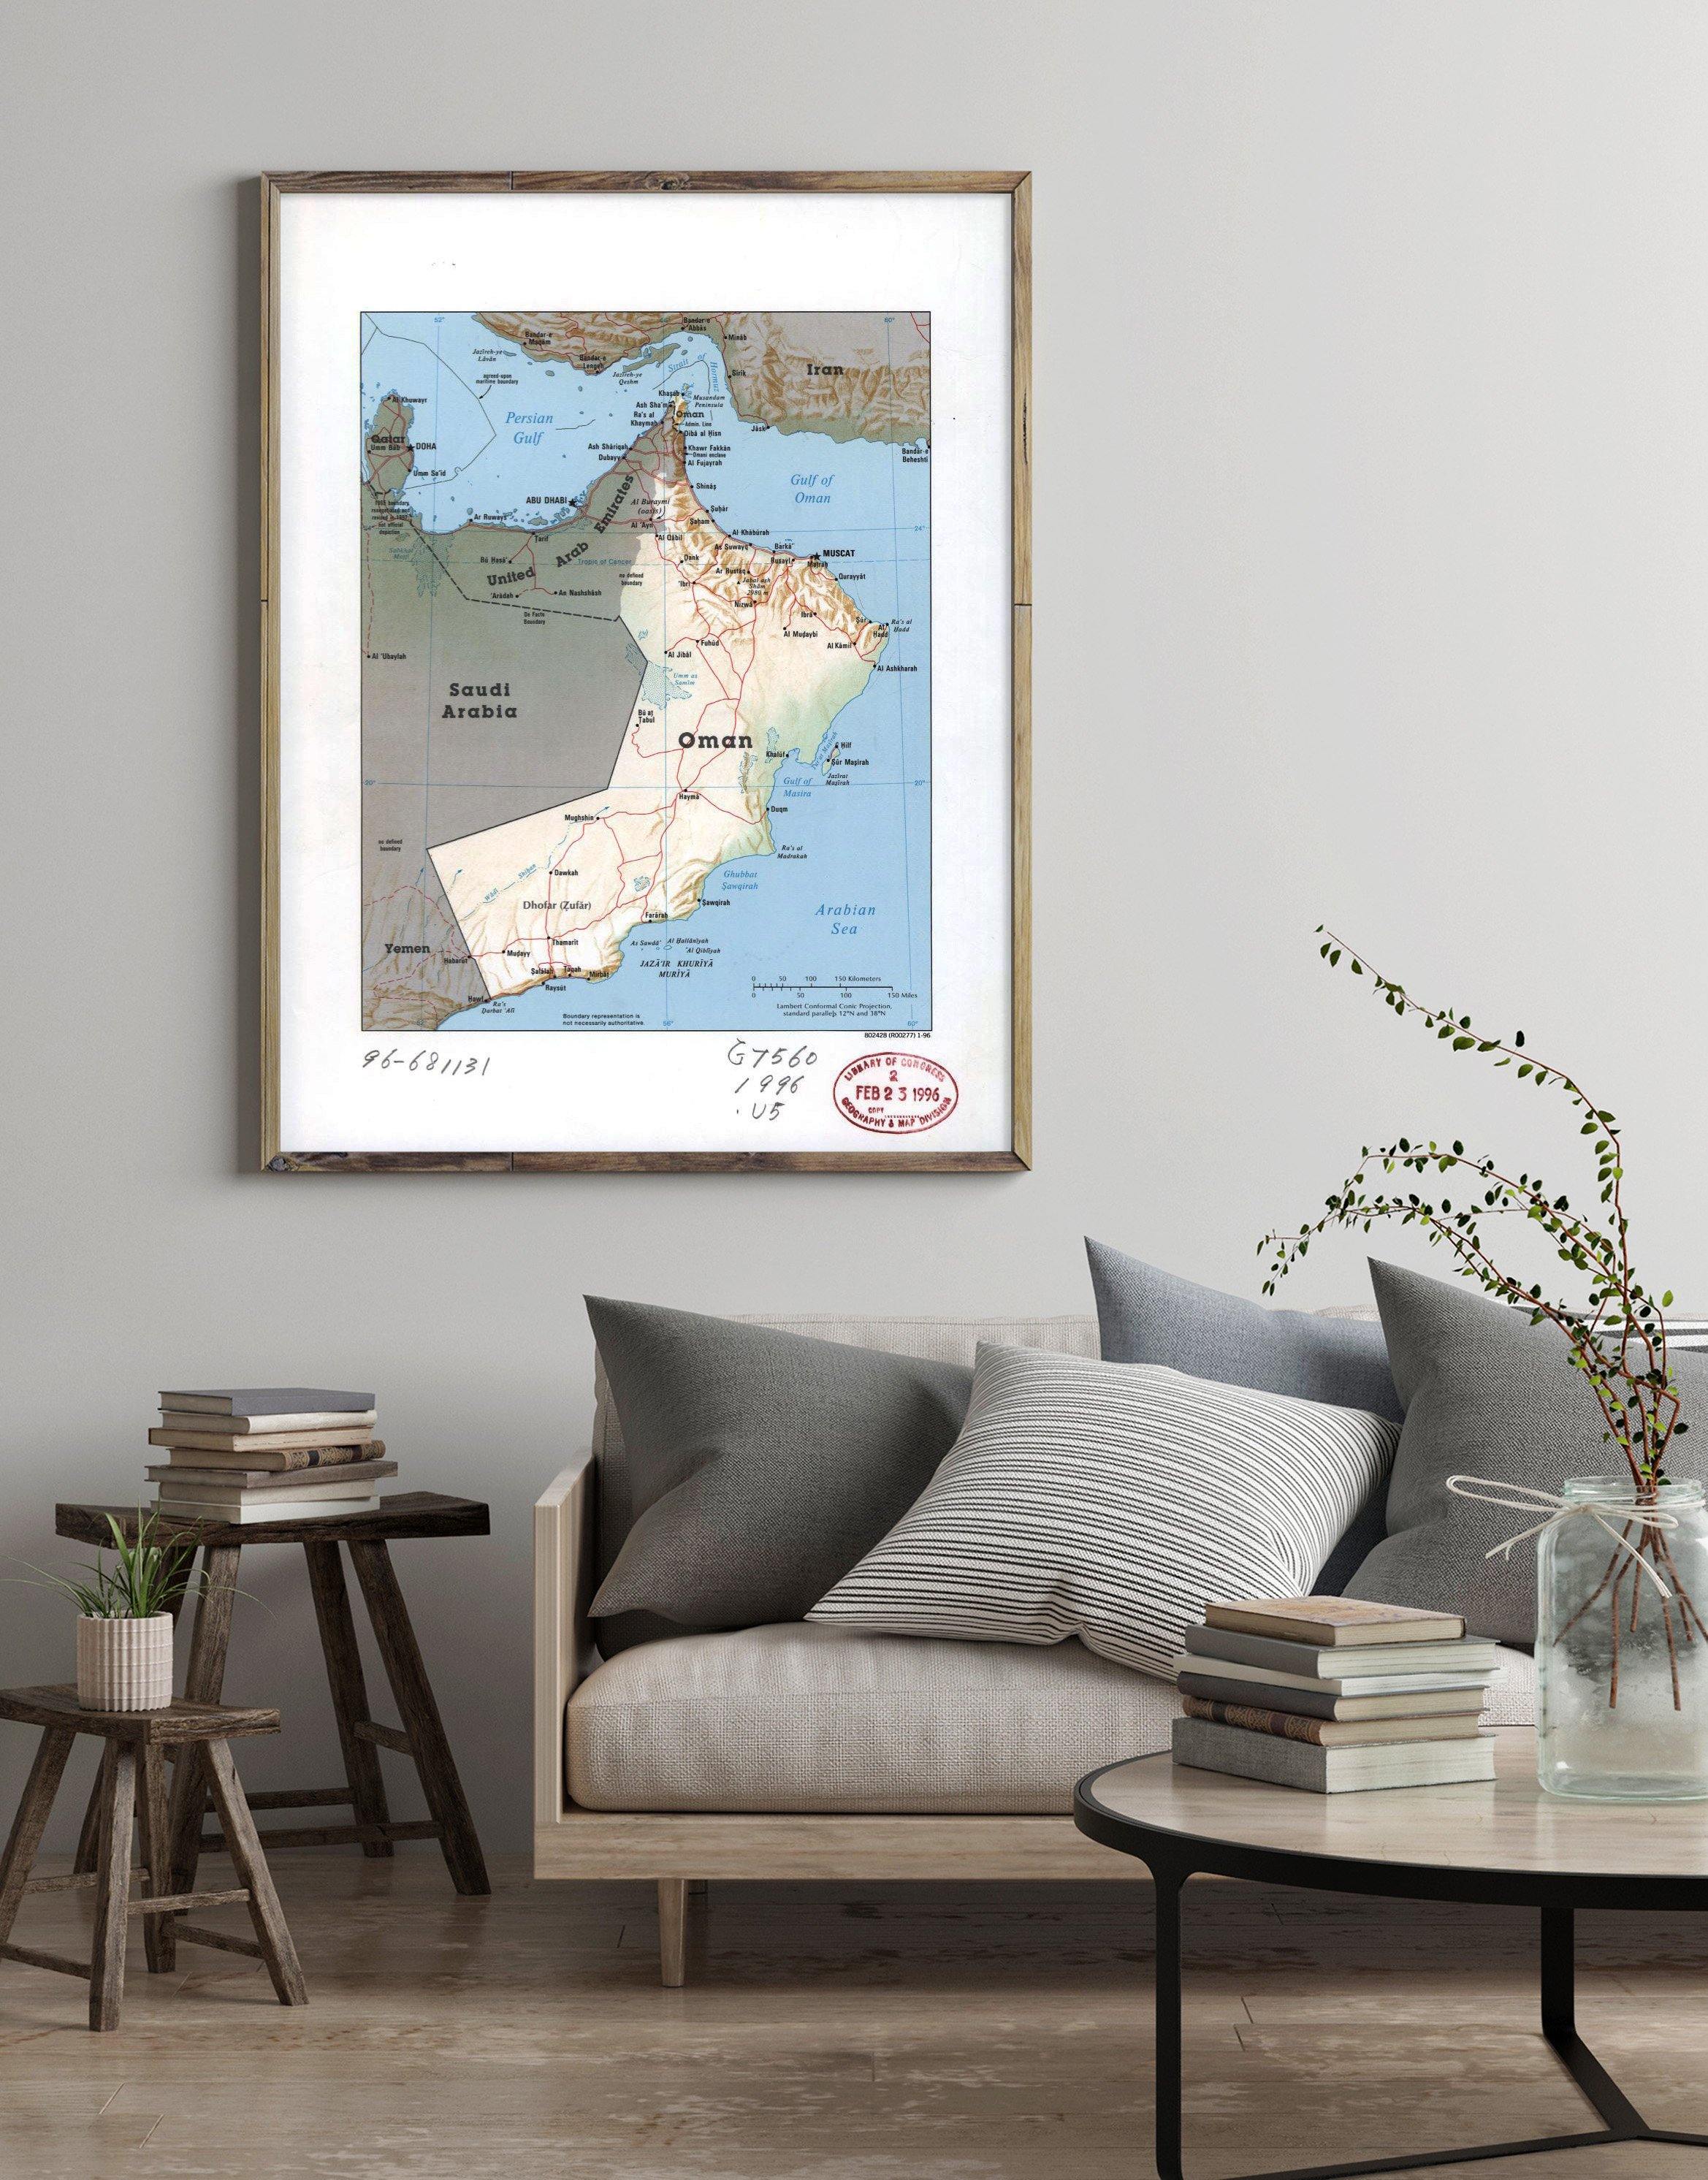 1996 Map| Oman| Oman Map Size: 18 inches x 24 inches |Fits 18x24 size - New York Map Company